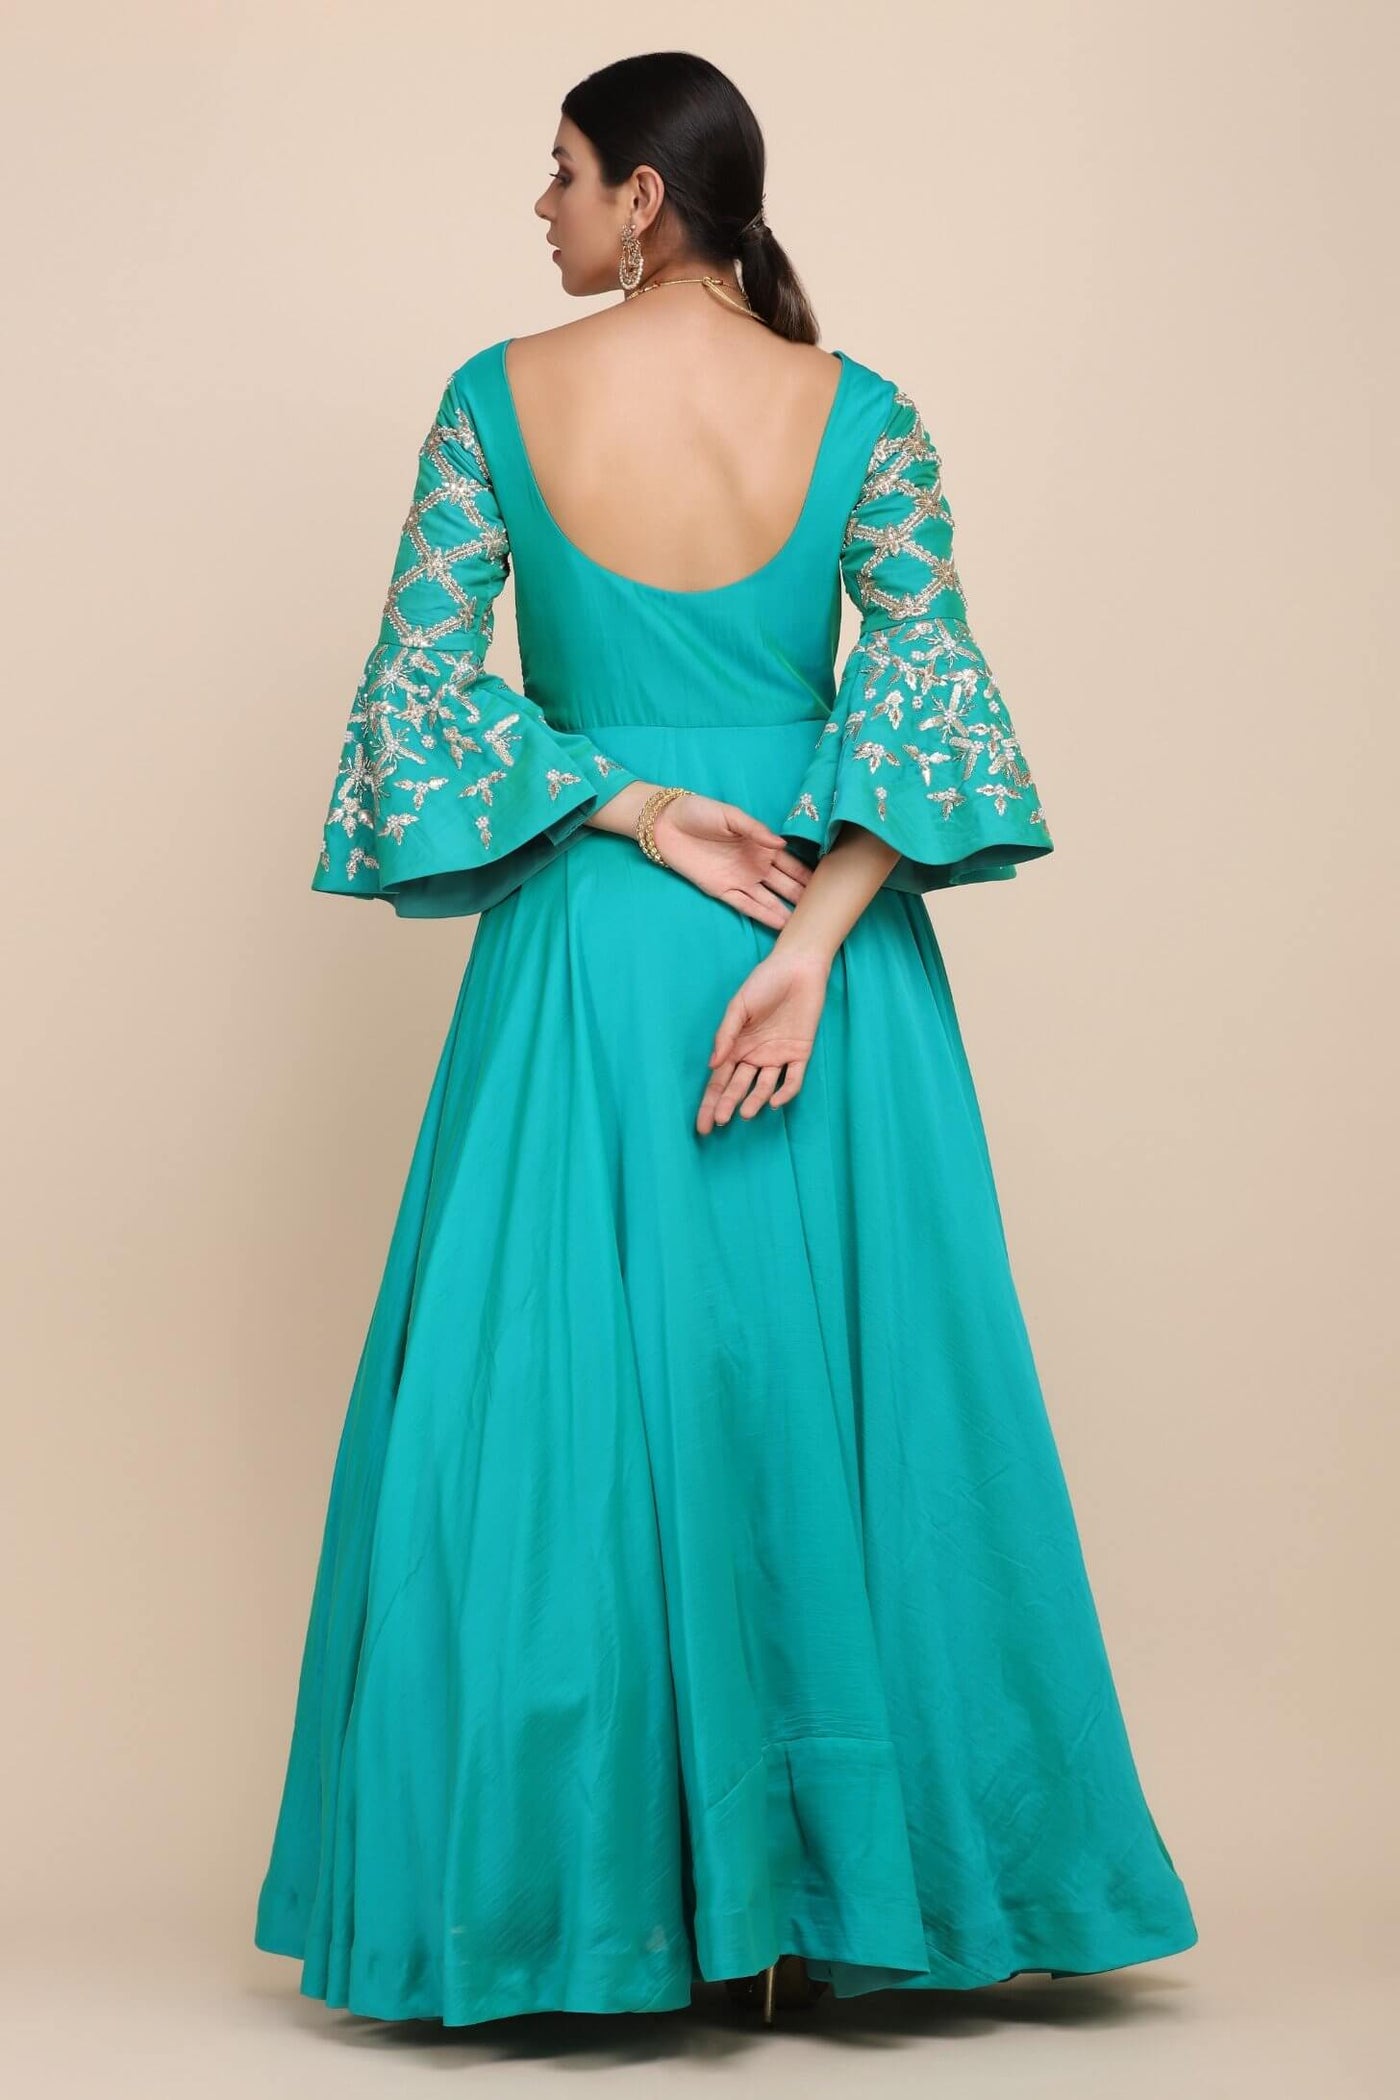 full back look of turquoise dress